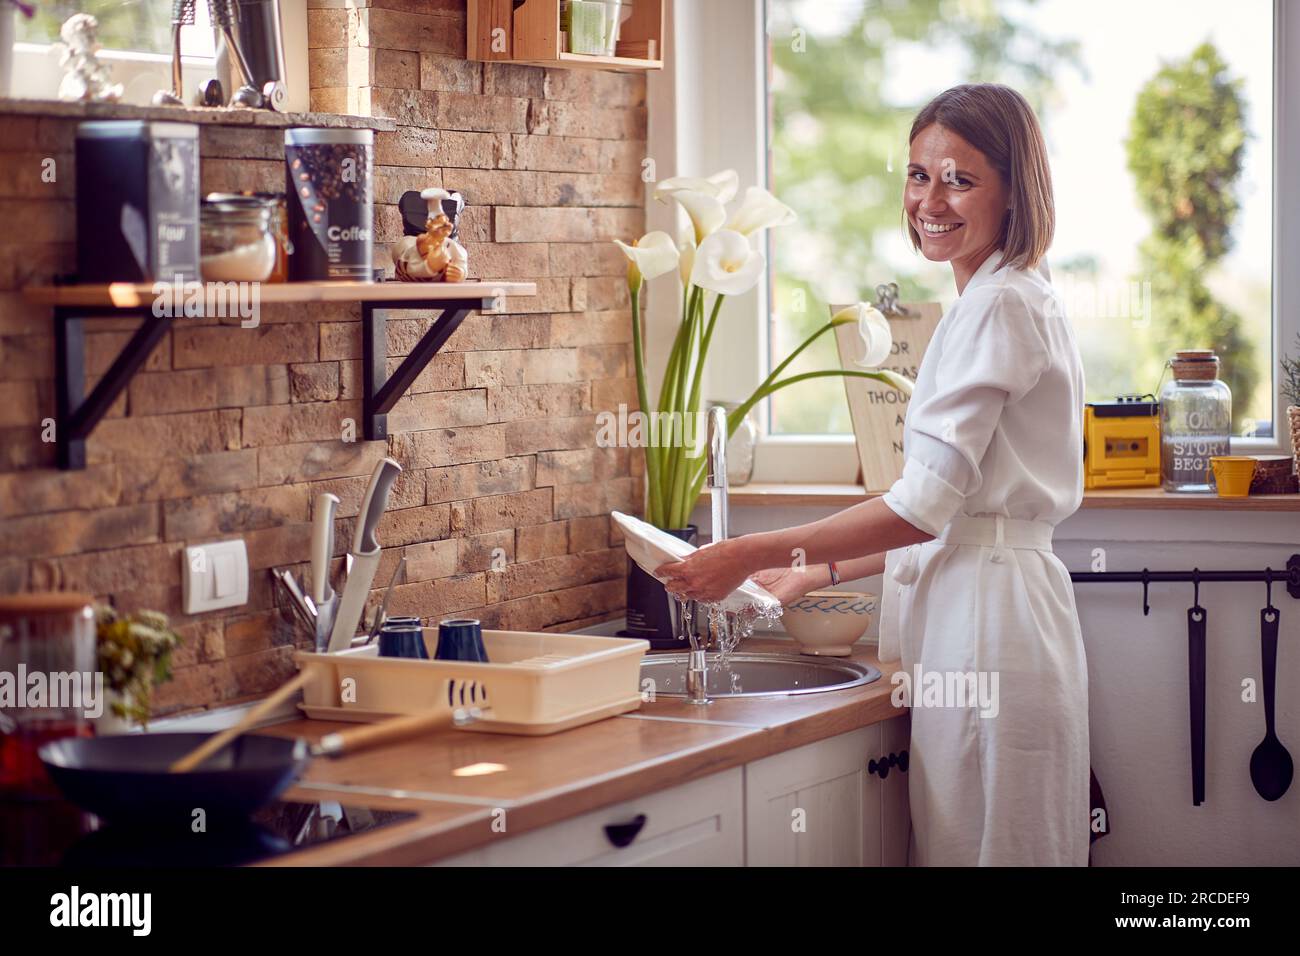 Horizontal shot of young woman washing dishes in a modern kitchen, feeling joyful. Lifestyle, home concept. Stock Photo